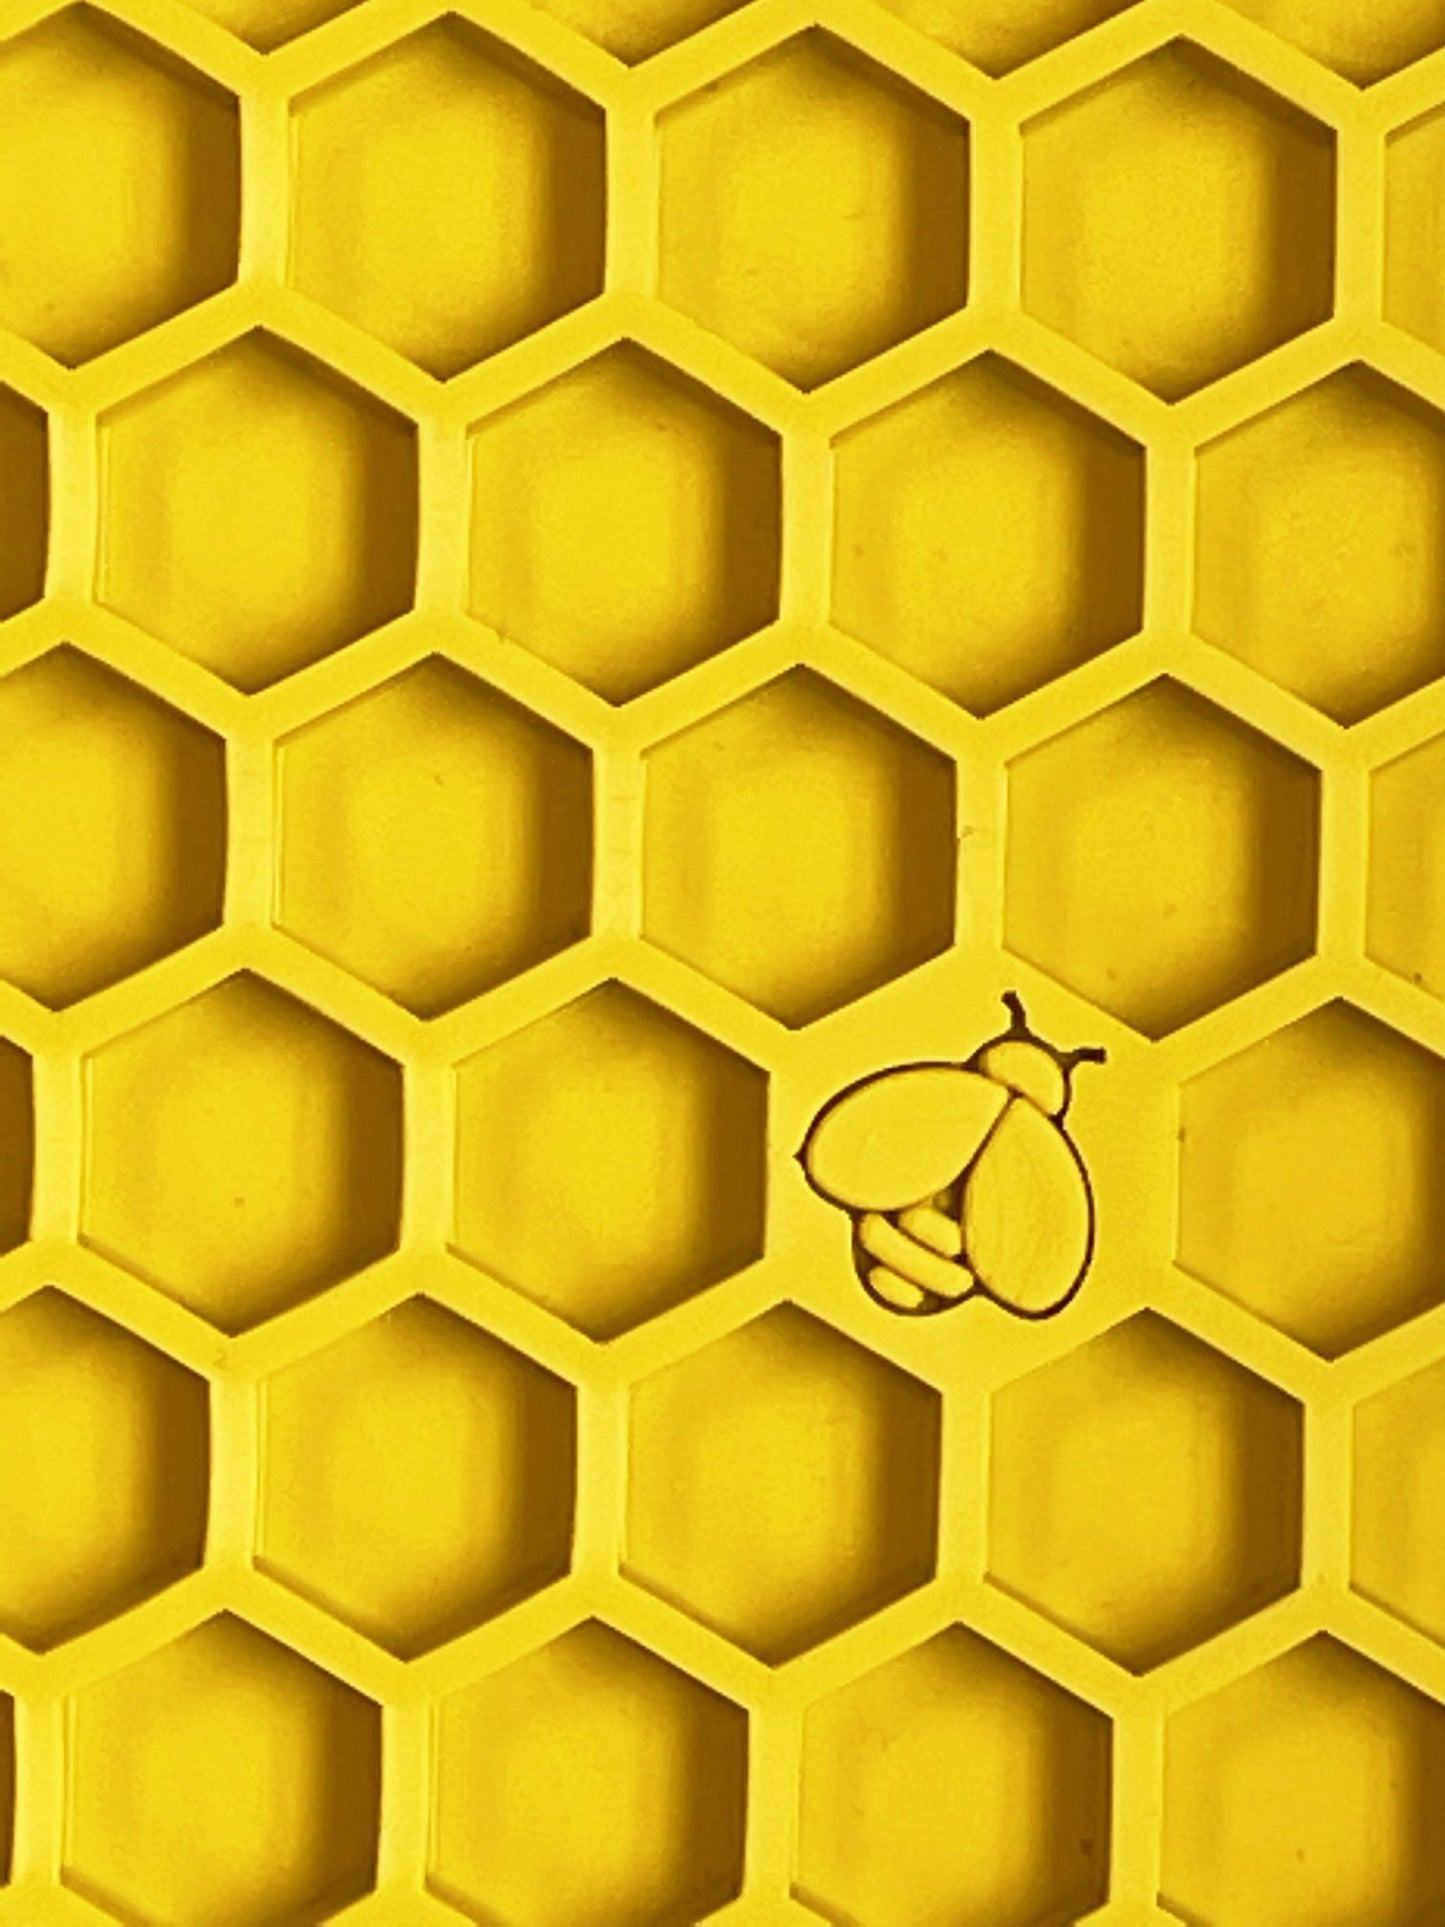 A close-up of a yellow honeycomb pattern with one cell containing a small bee, designed to mimic Your Whole Dog's Soda Pup EMAT ENRICHMENT LICKING MAT.